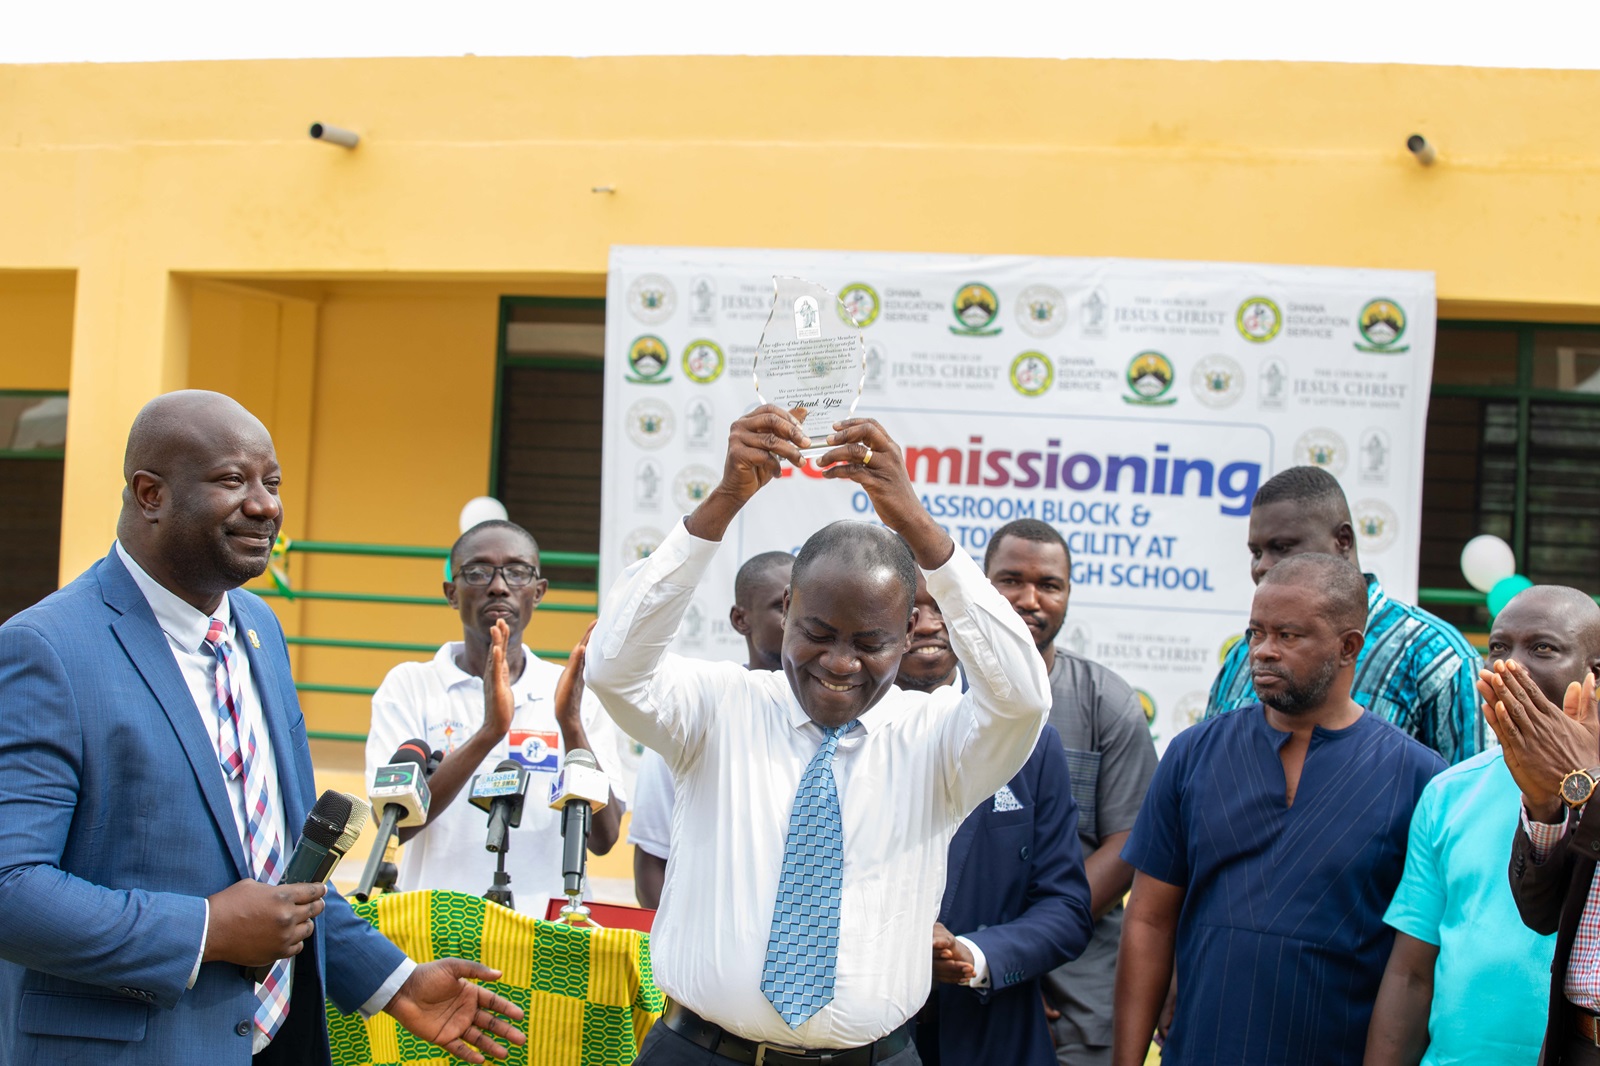 The Church of Jesus Christ of Latter-day Saints donates state-of-the-art facilities to Odorgonno SHS